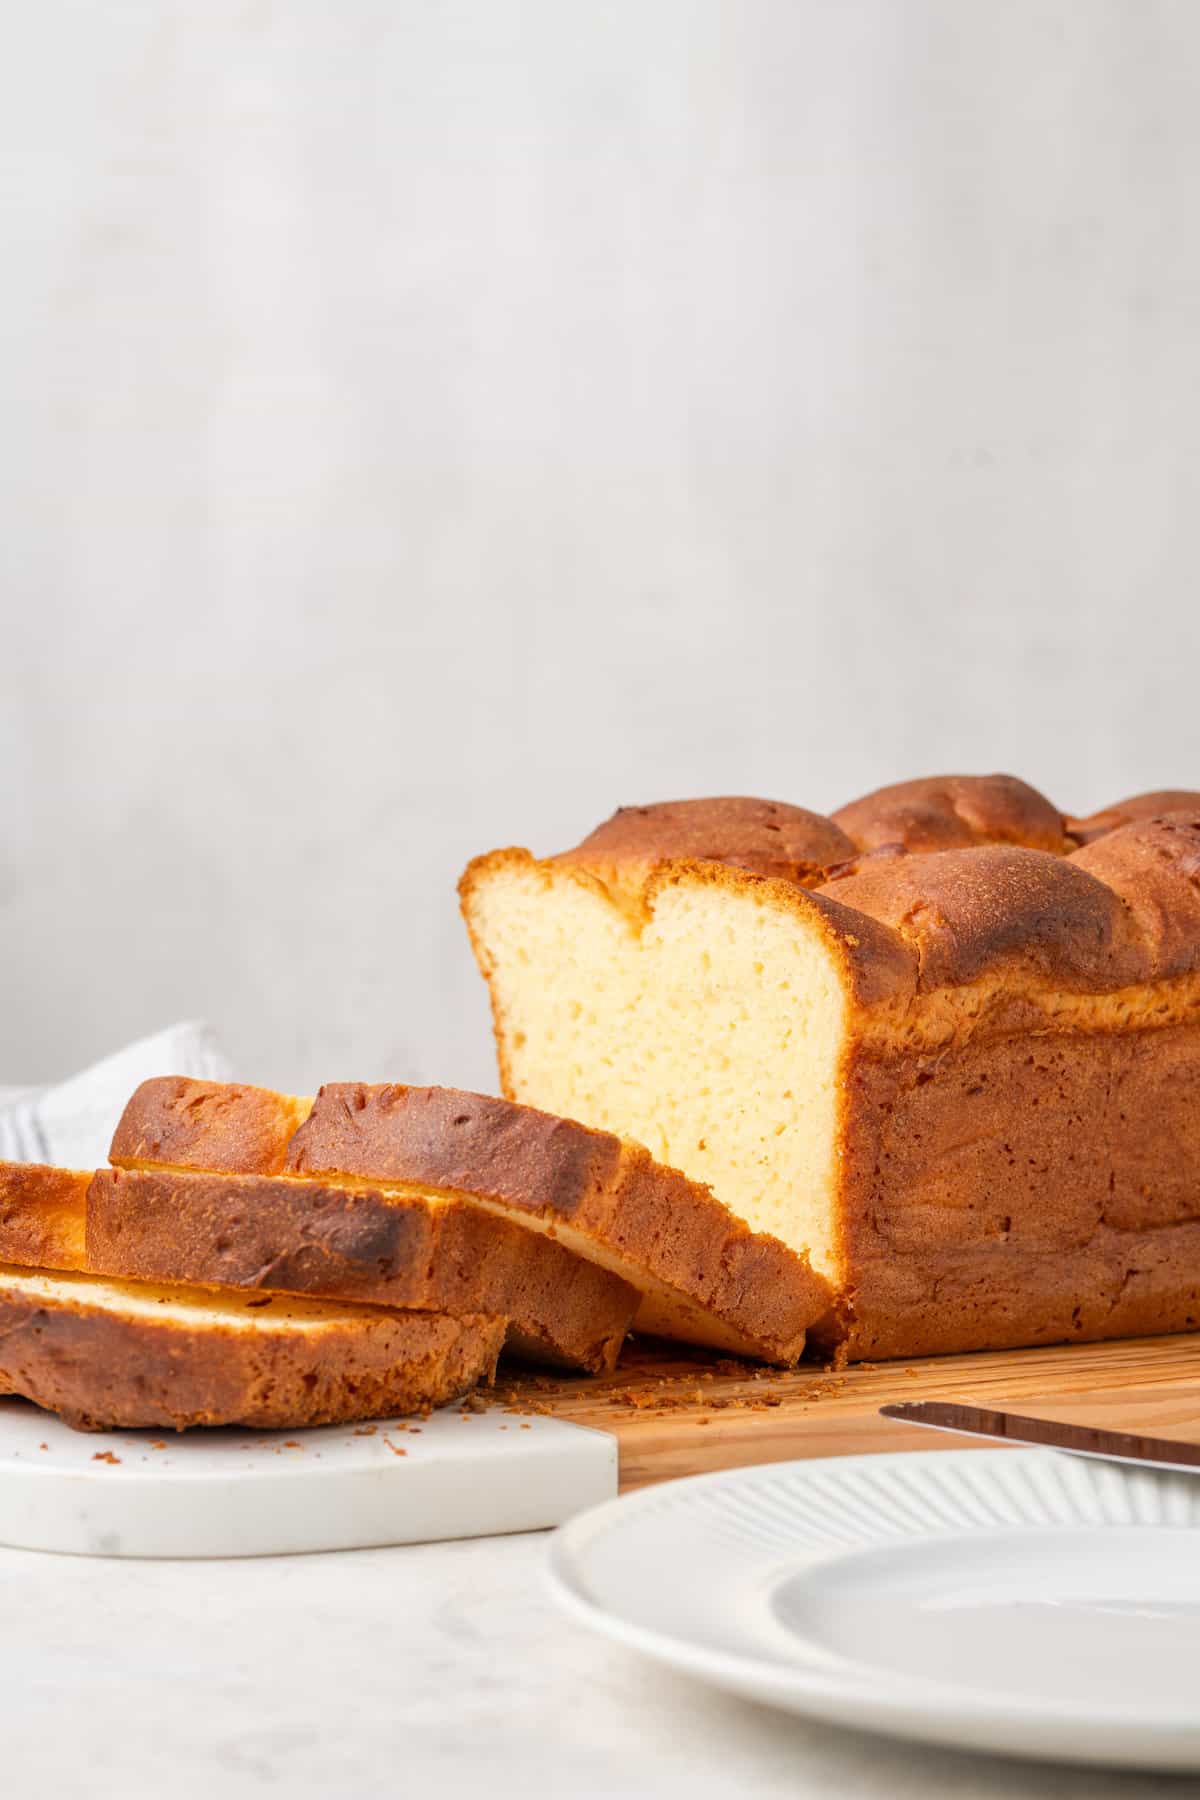 A loaf of gluten free brioche dough is shown with slices cut out of it.